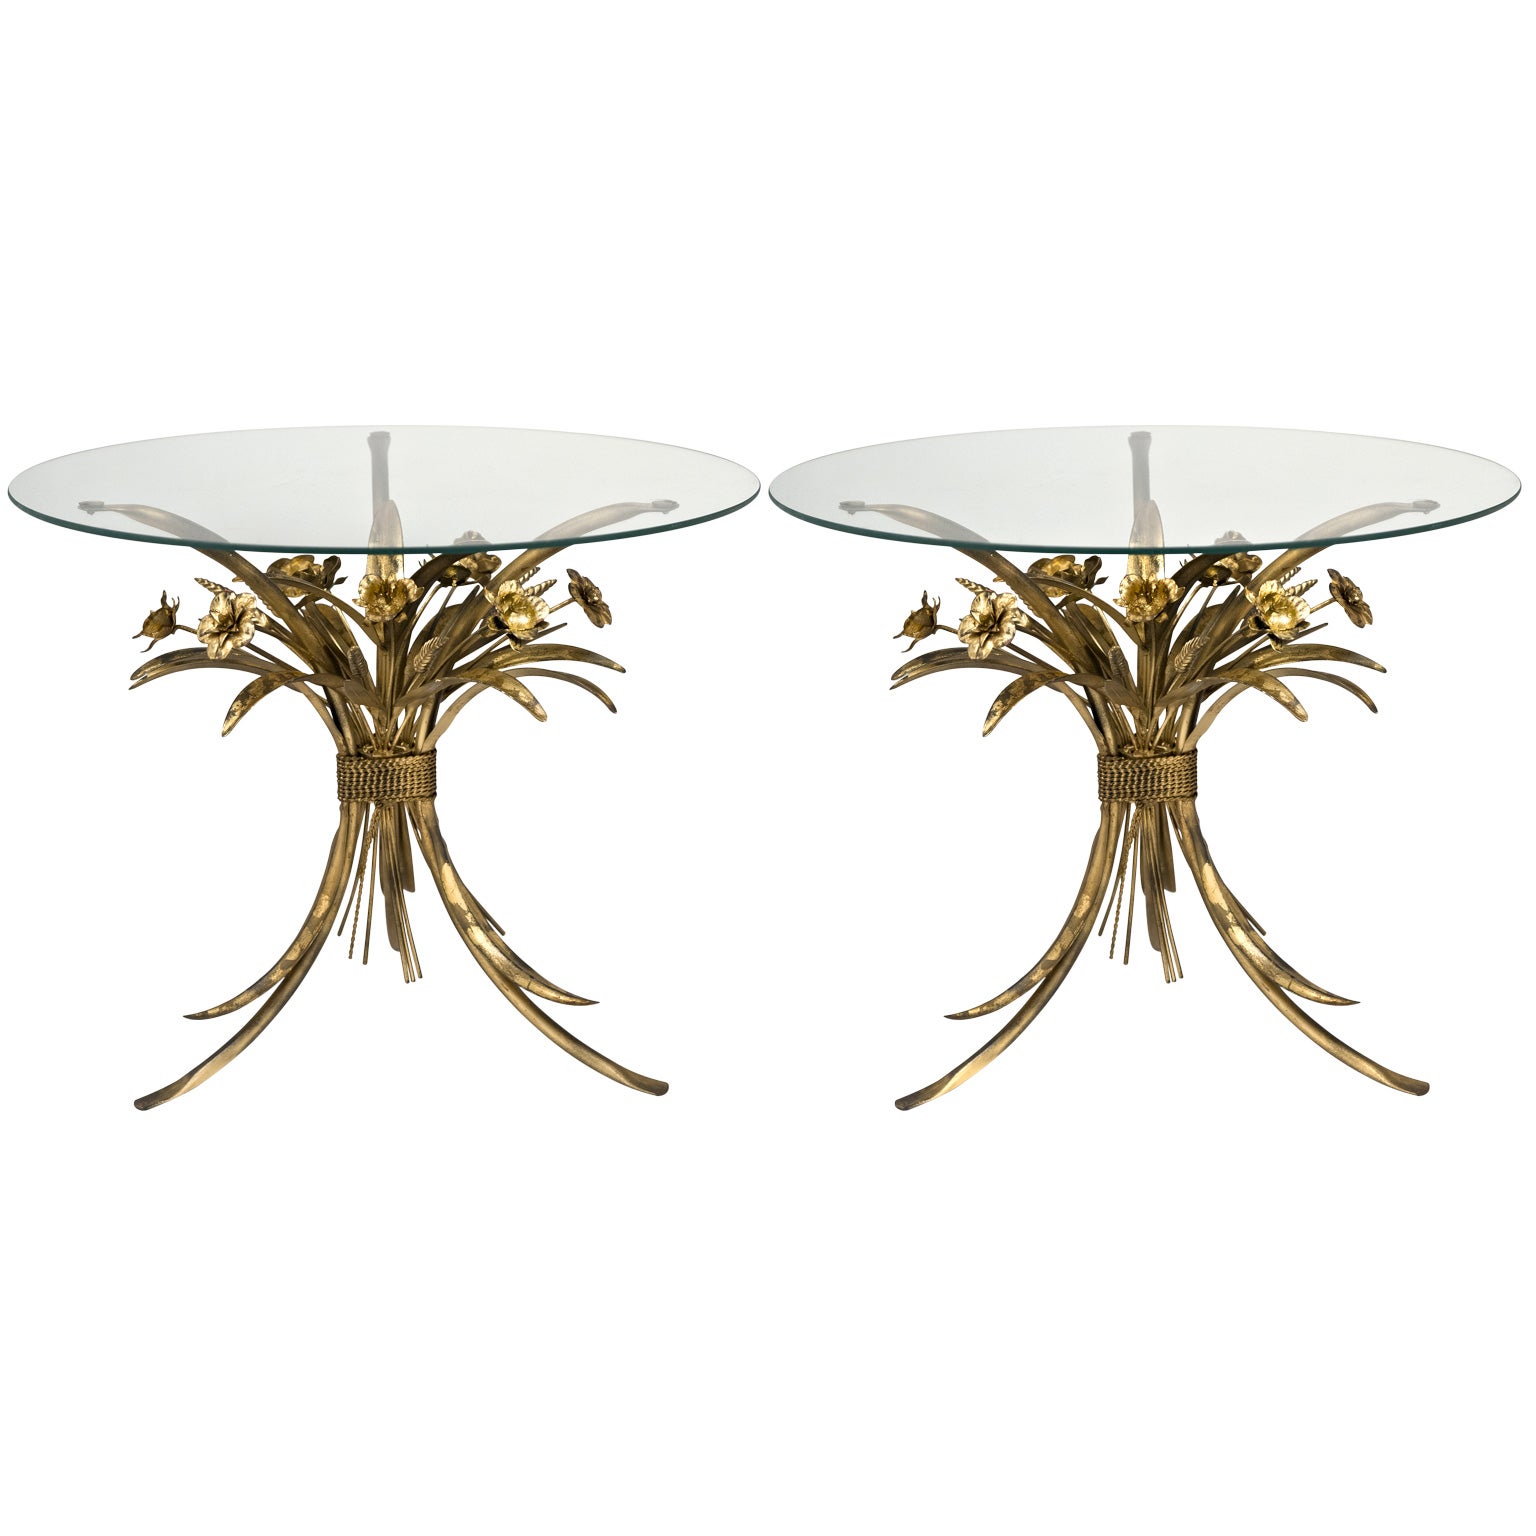 Pair of Coco Chanel "Sheaf of Wheat" SIde Tables